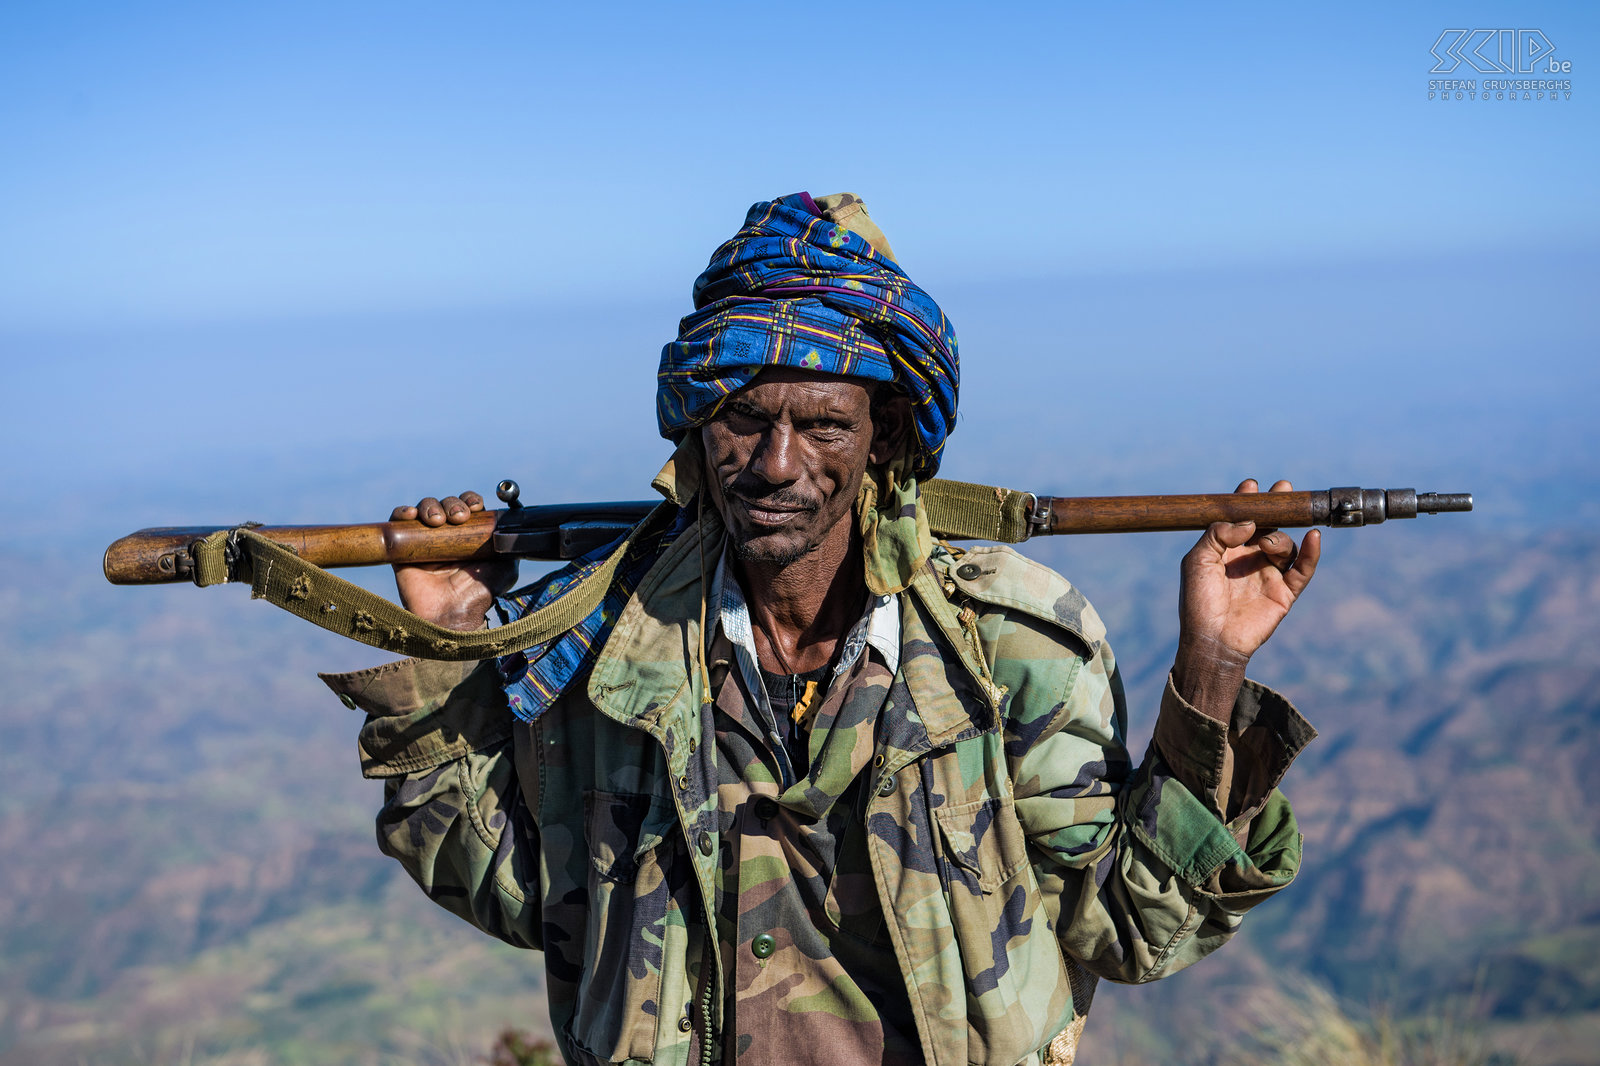 Simien Mountains - Scout The armed scout who escorted us during our five days hike in the Simien Mountains. Stefan Cruysberghs